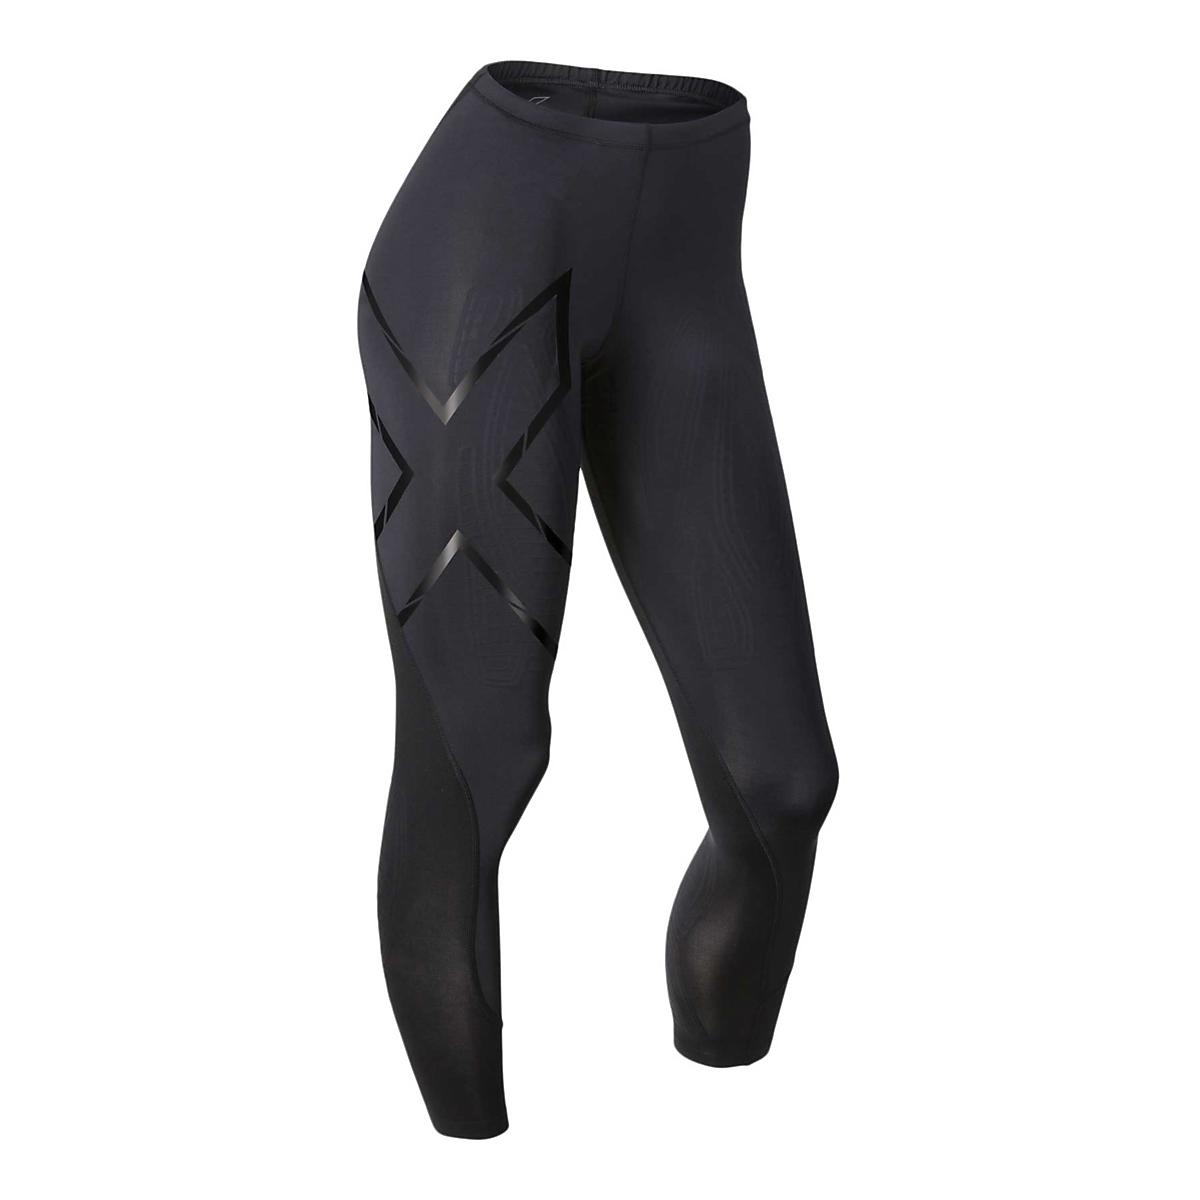 Womens CW-X Endurance Generator Fitted Tights at Road Runner Sports